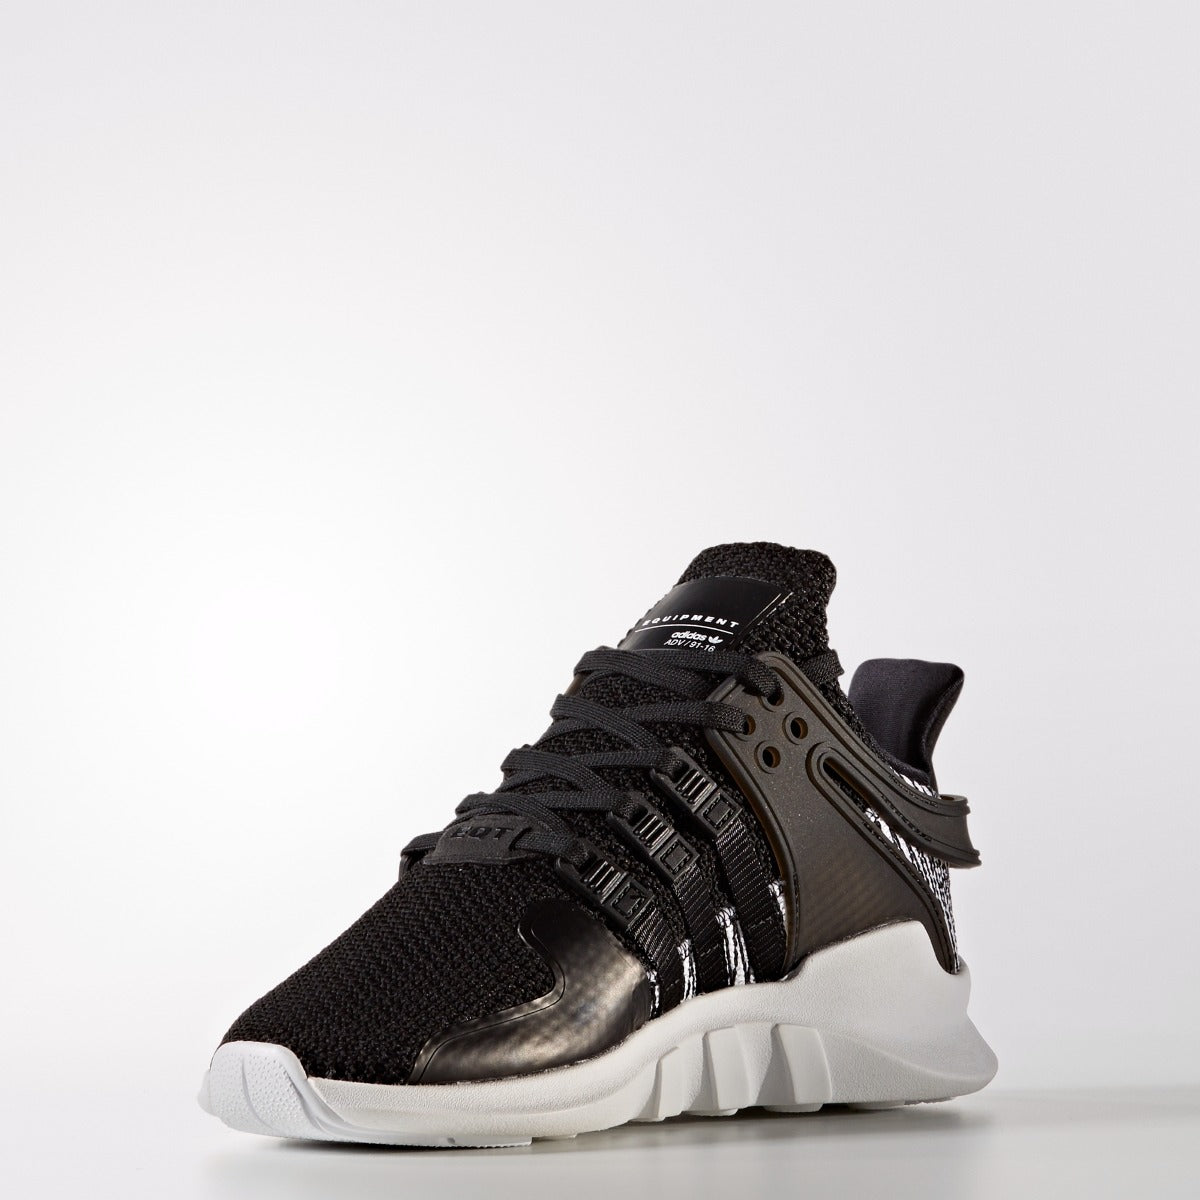 adidas eqt support adv shoes